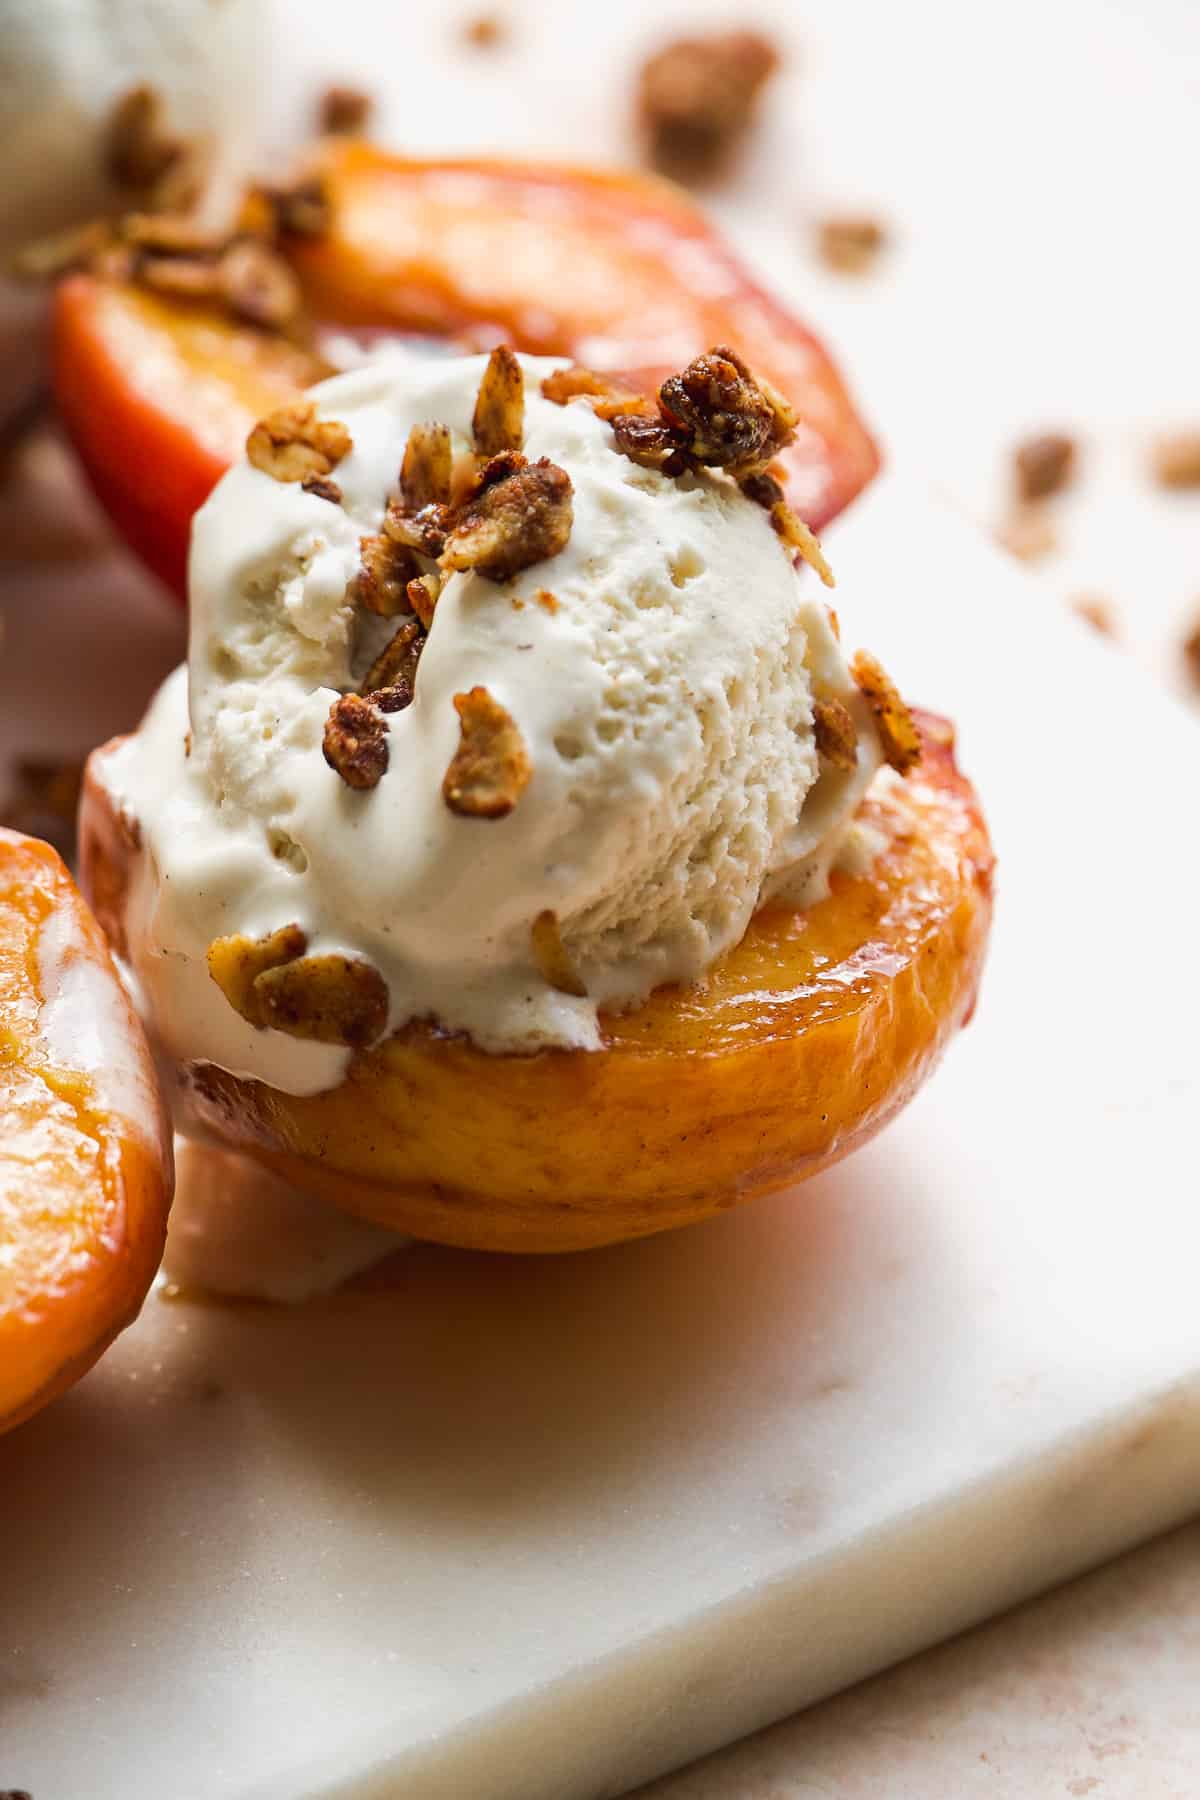 Roasted peach with ice cream on top and oat crumbles.